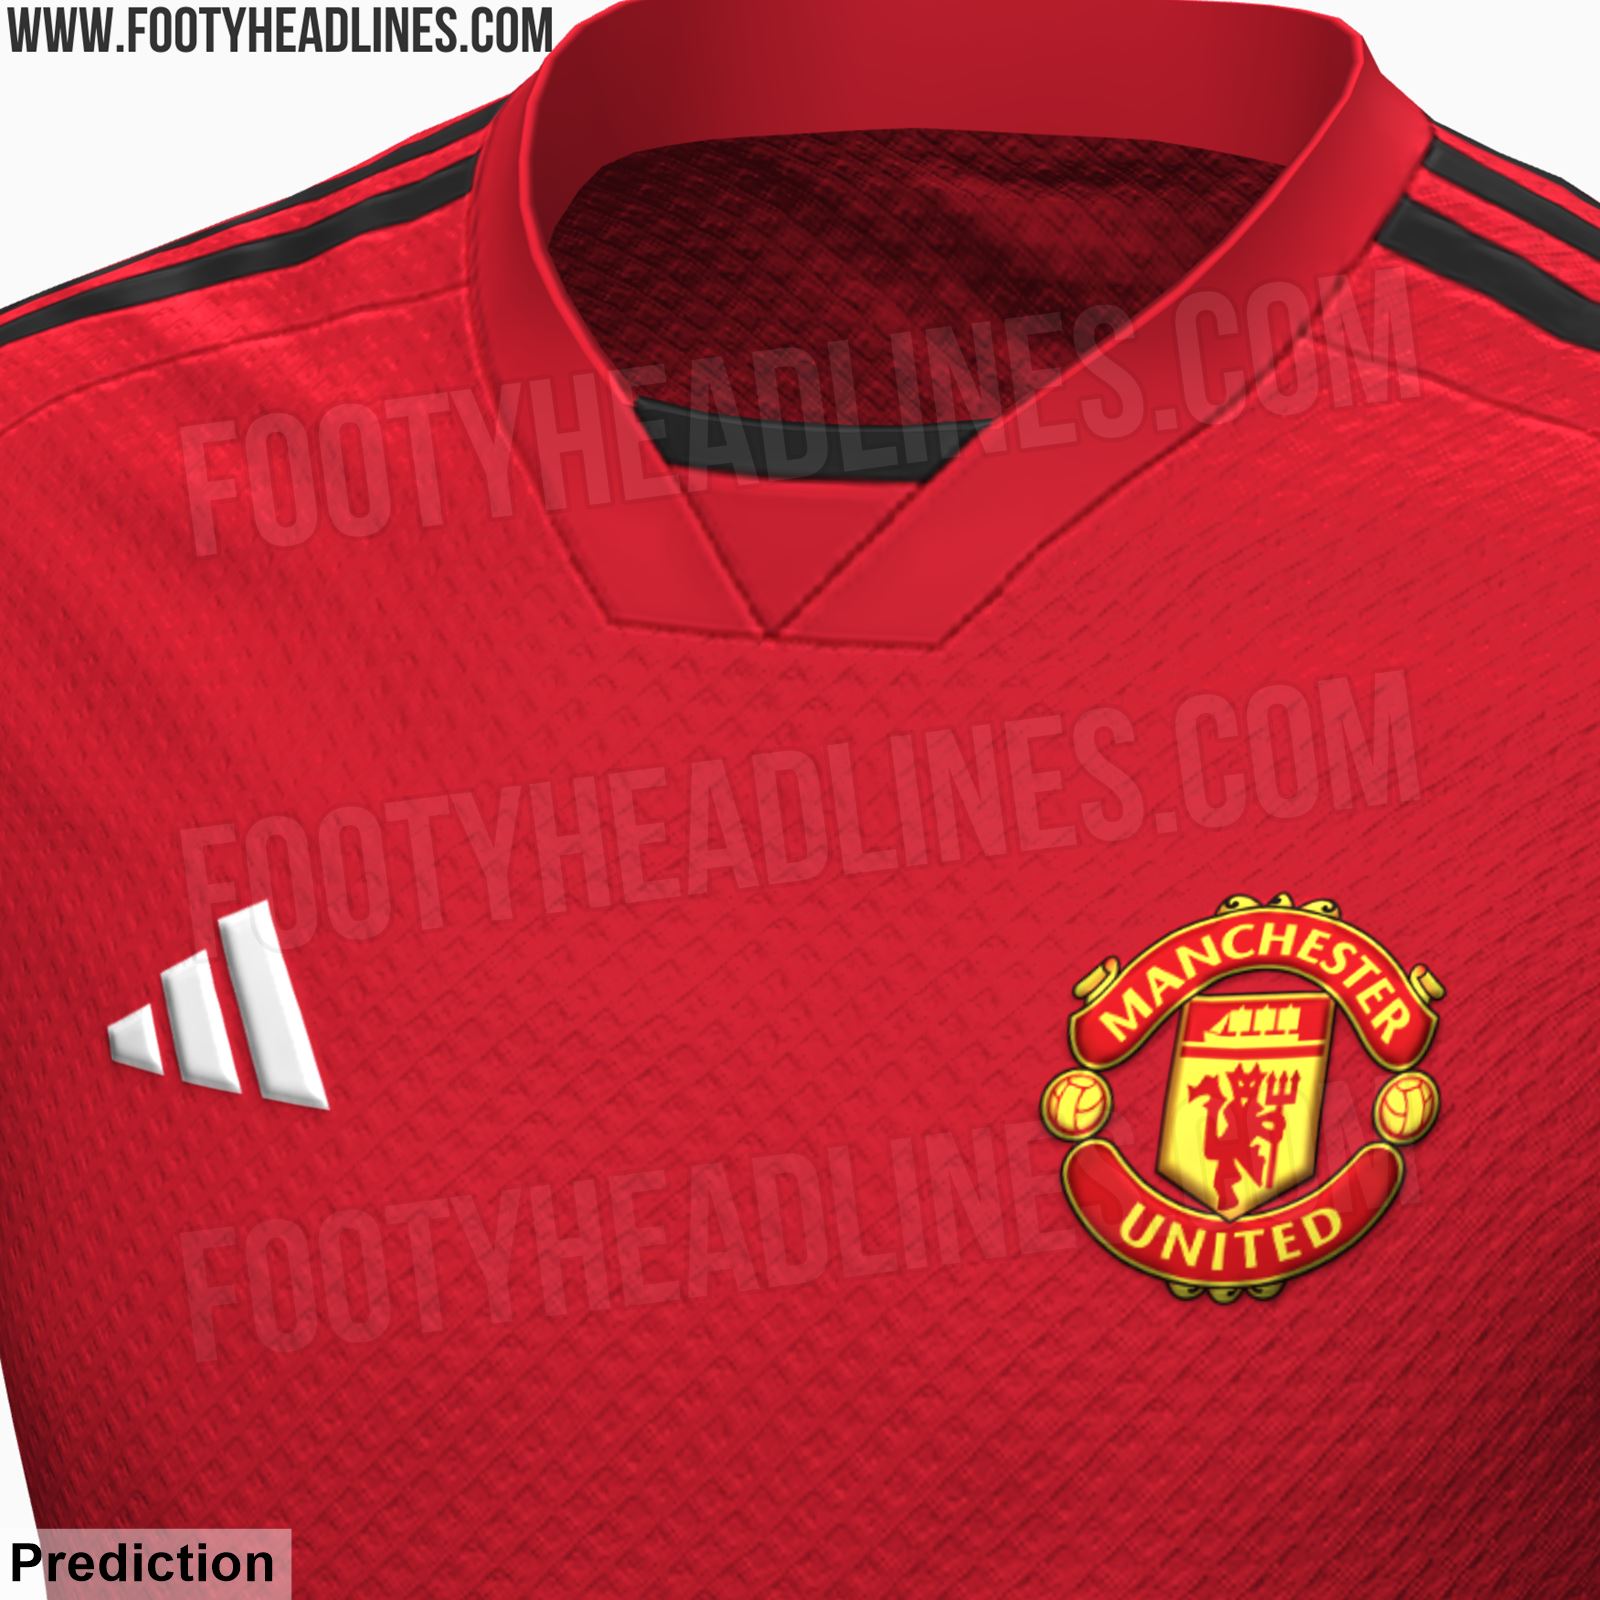 Manchester united 23/24 home jersey